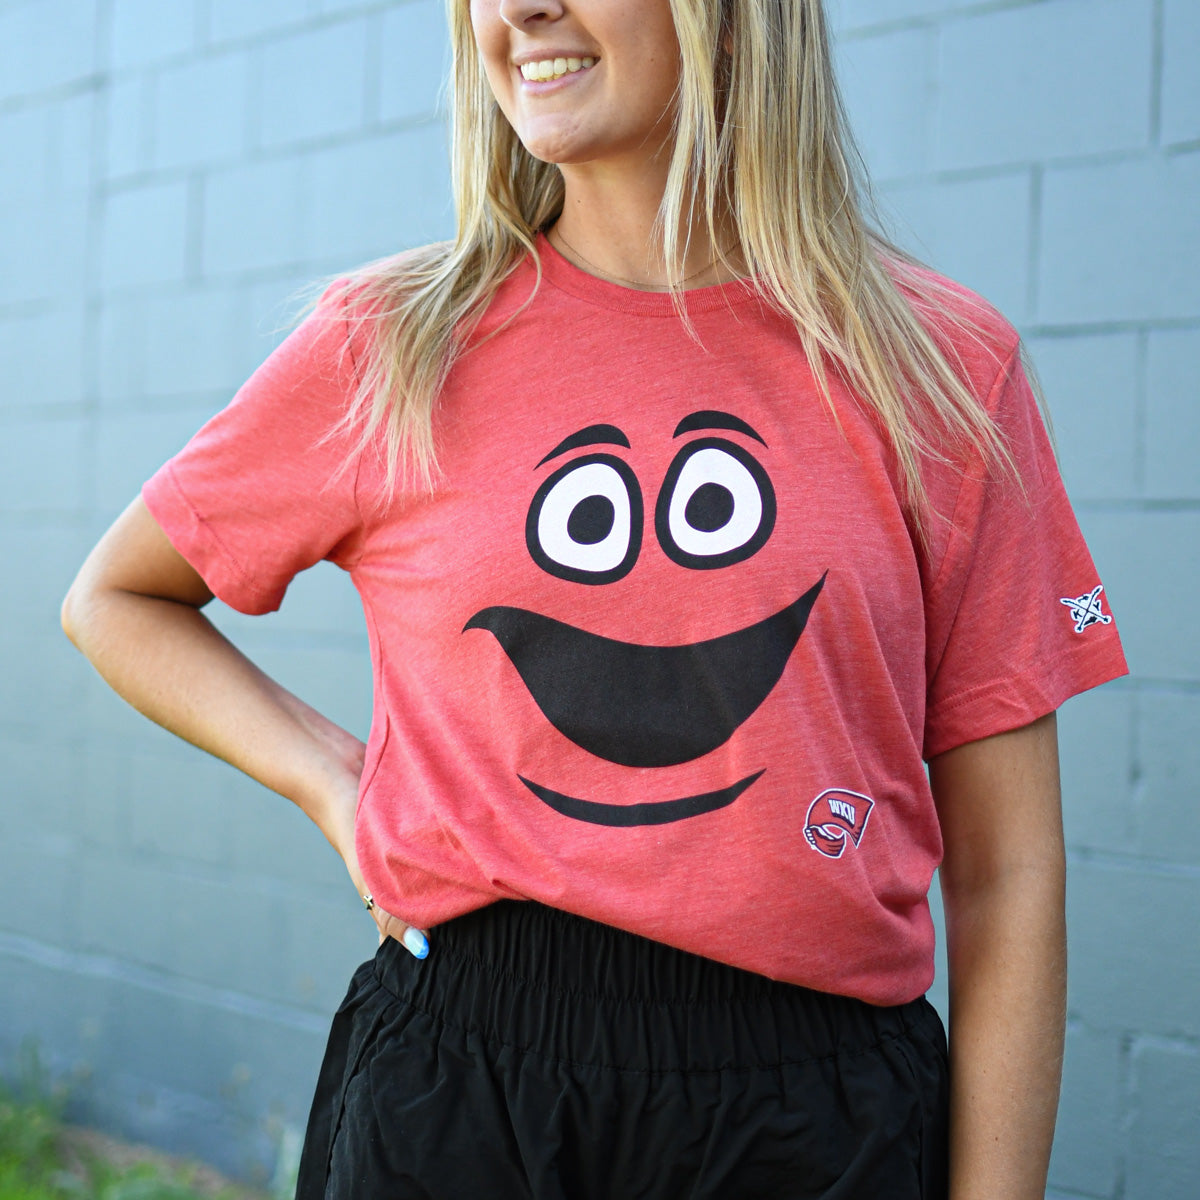 The Big Red Tee – The Kentucky Shop